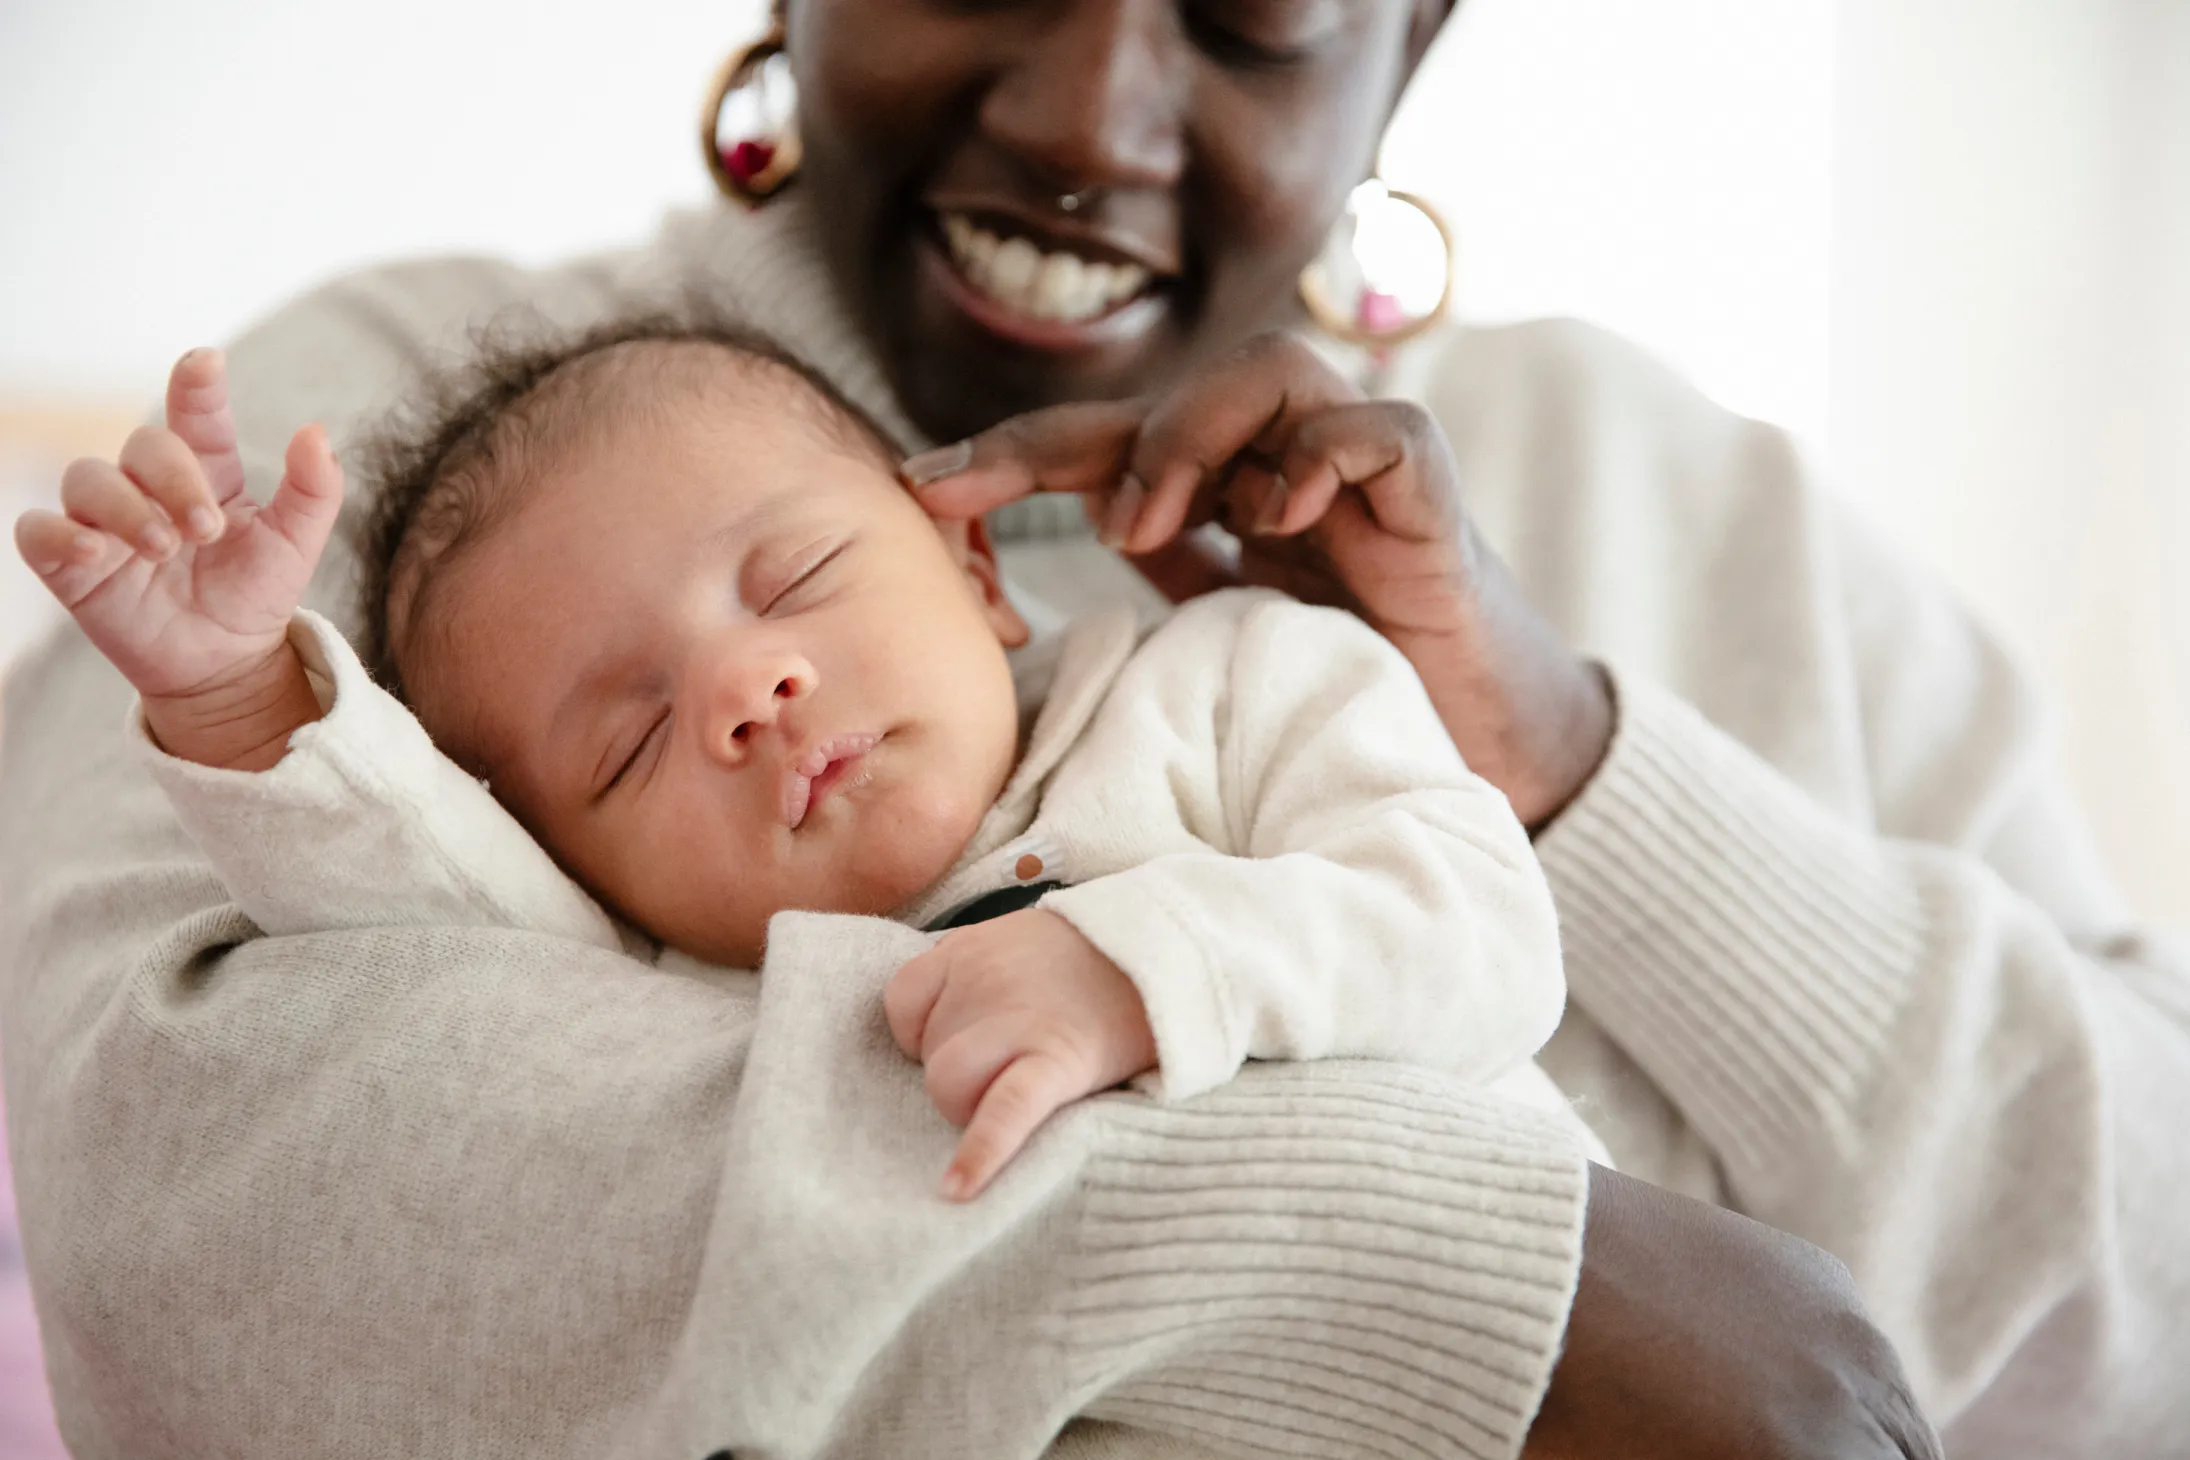 A smiling woman holding her sleeping newborn baby in her arms.